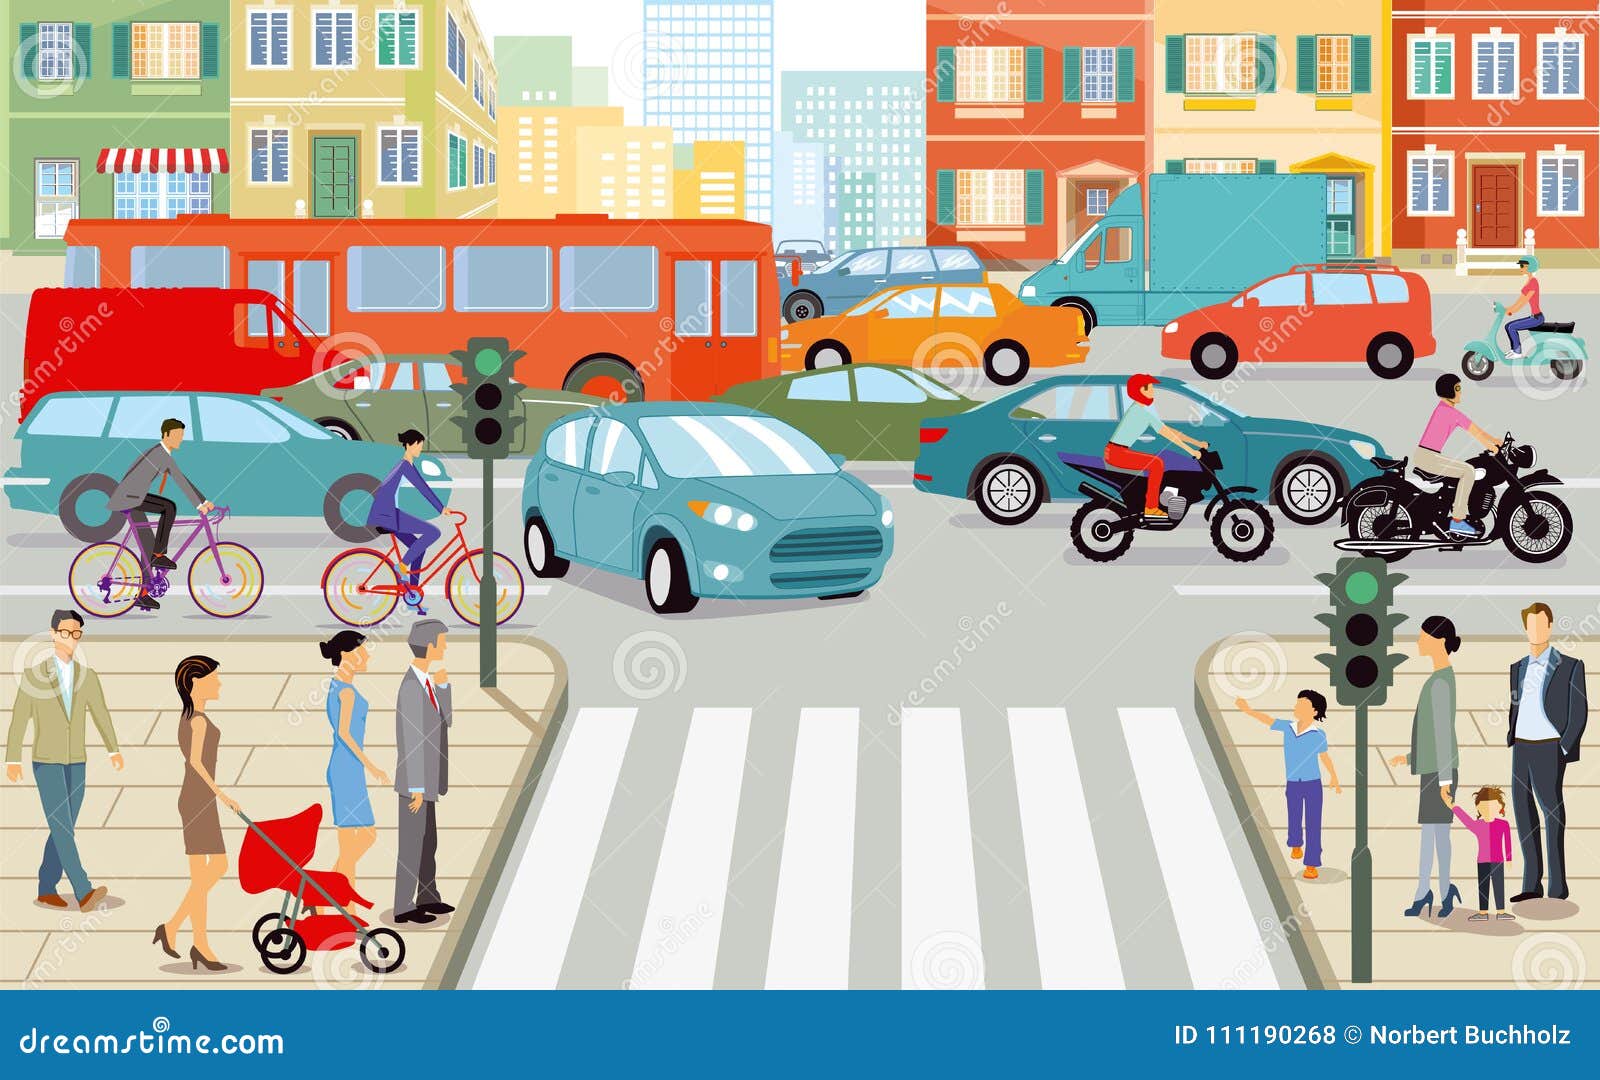 Traffic Cartoons, Illustrations & Vector Stock Images - 317638 Pictures